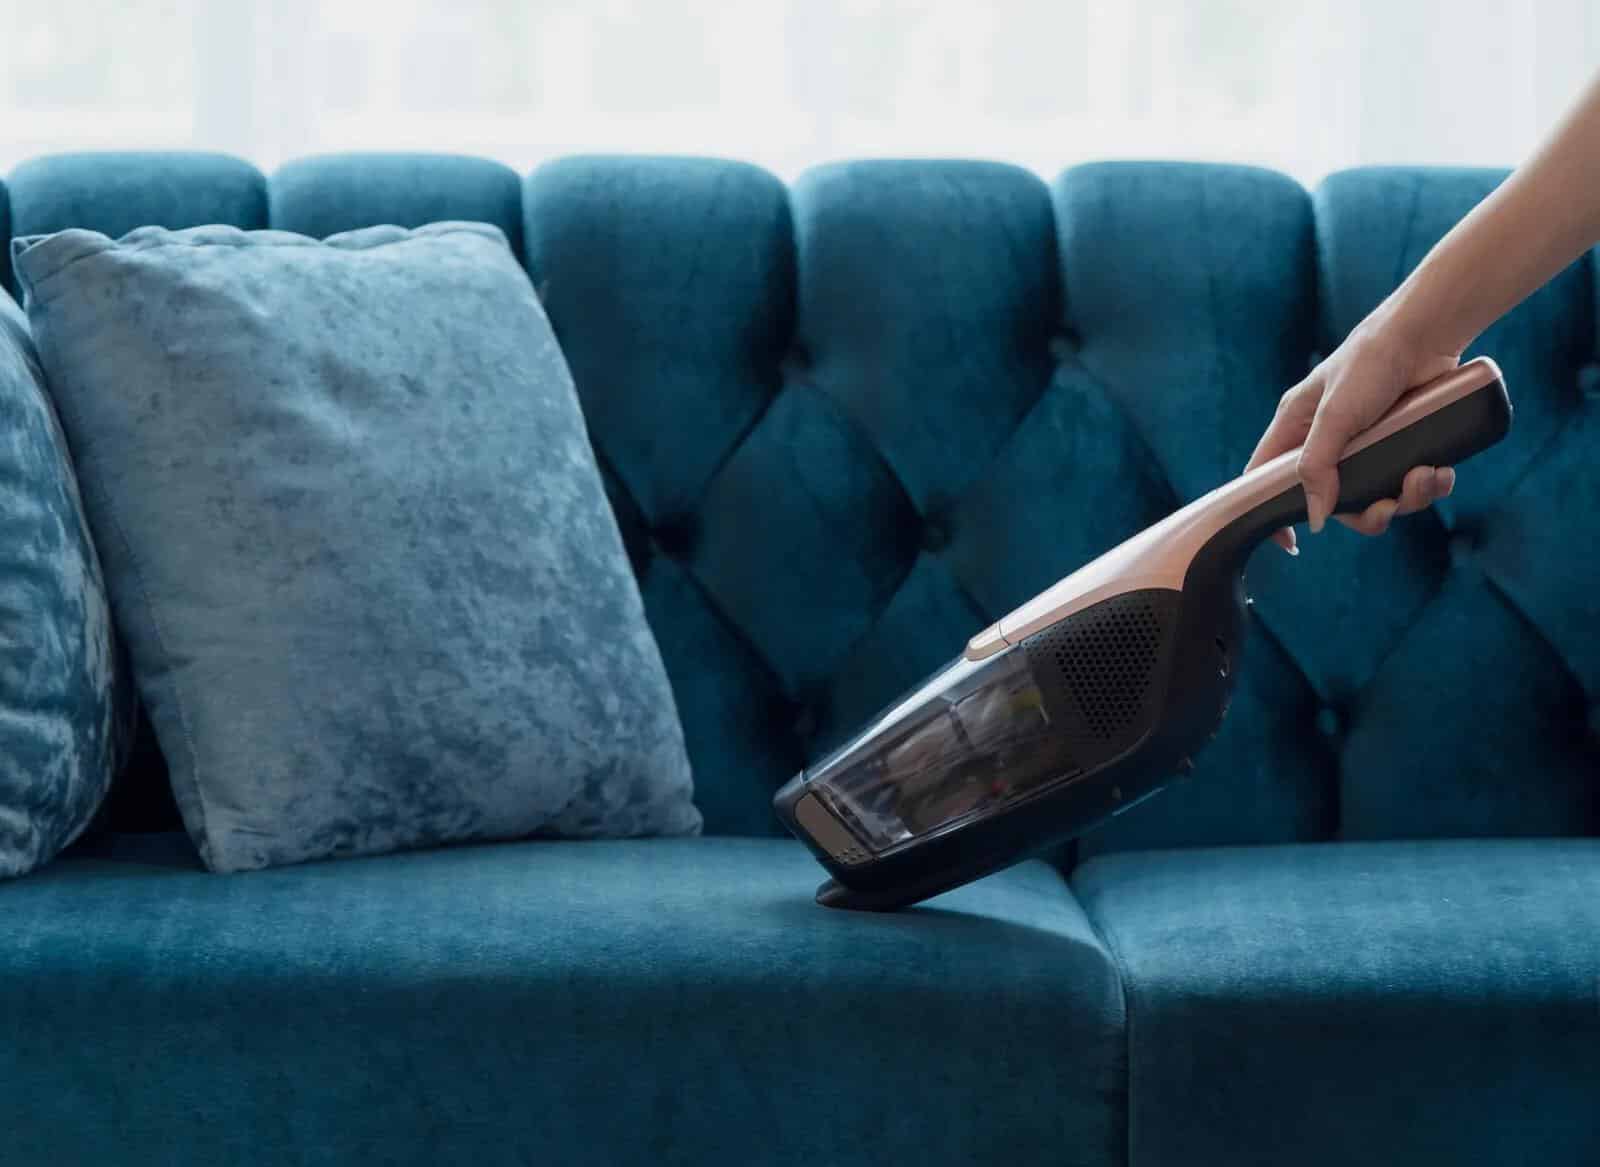 How to Address Potential Stains or Spills on a Blue Velvet Sofa